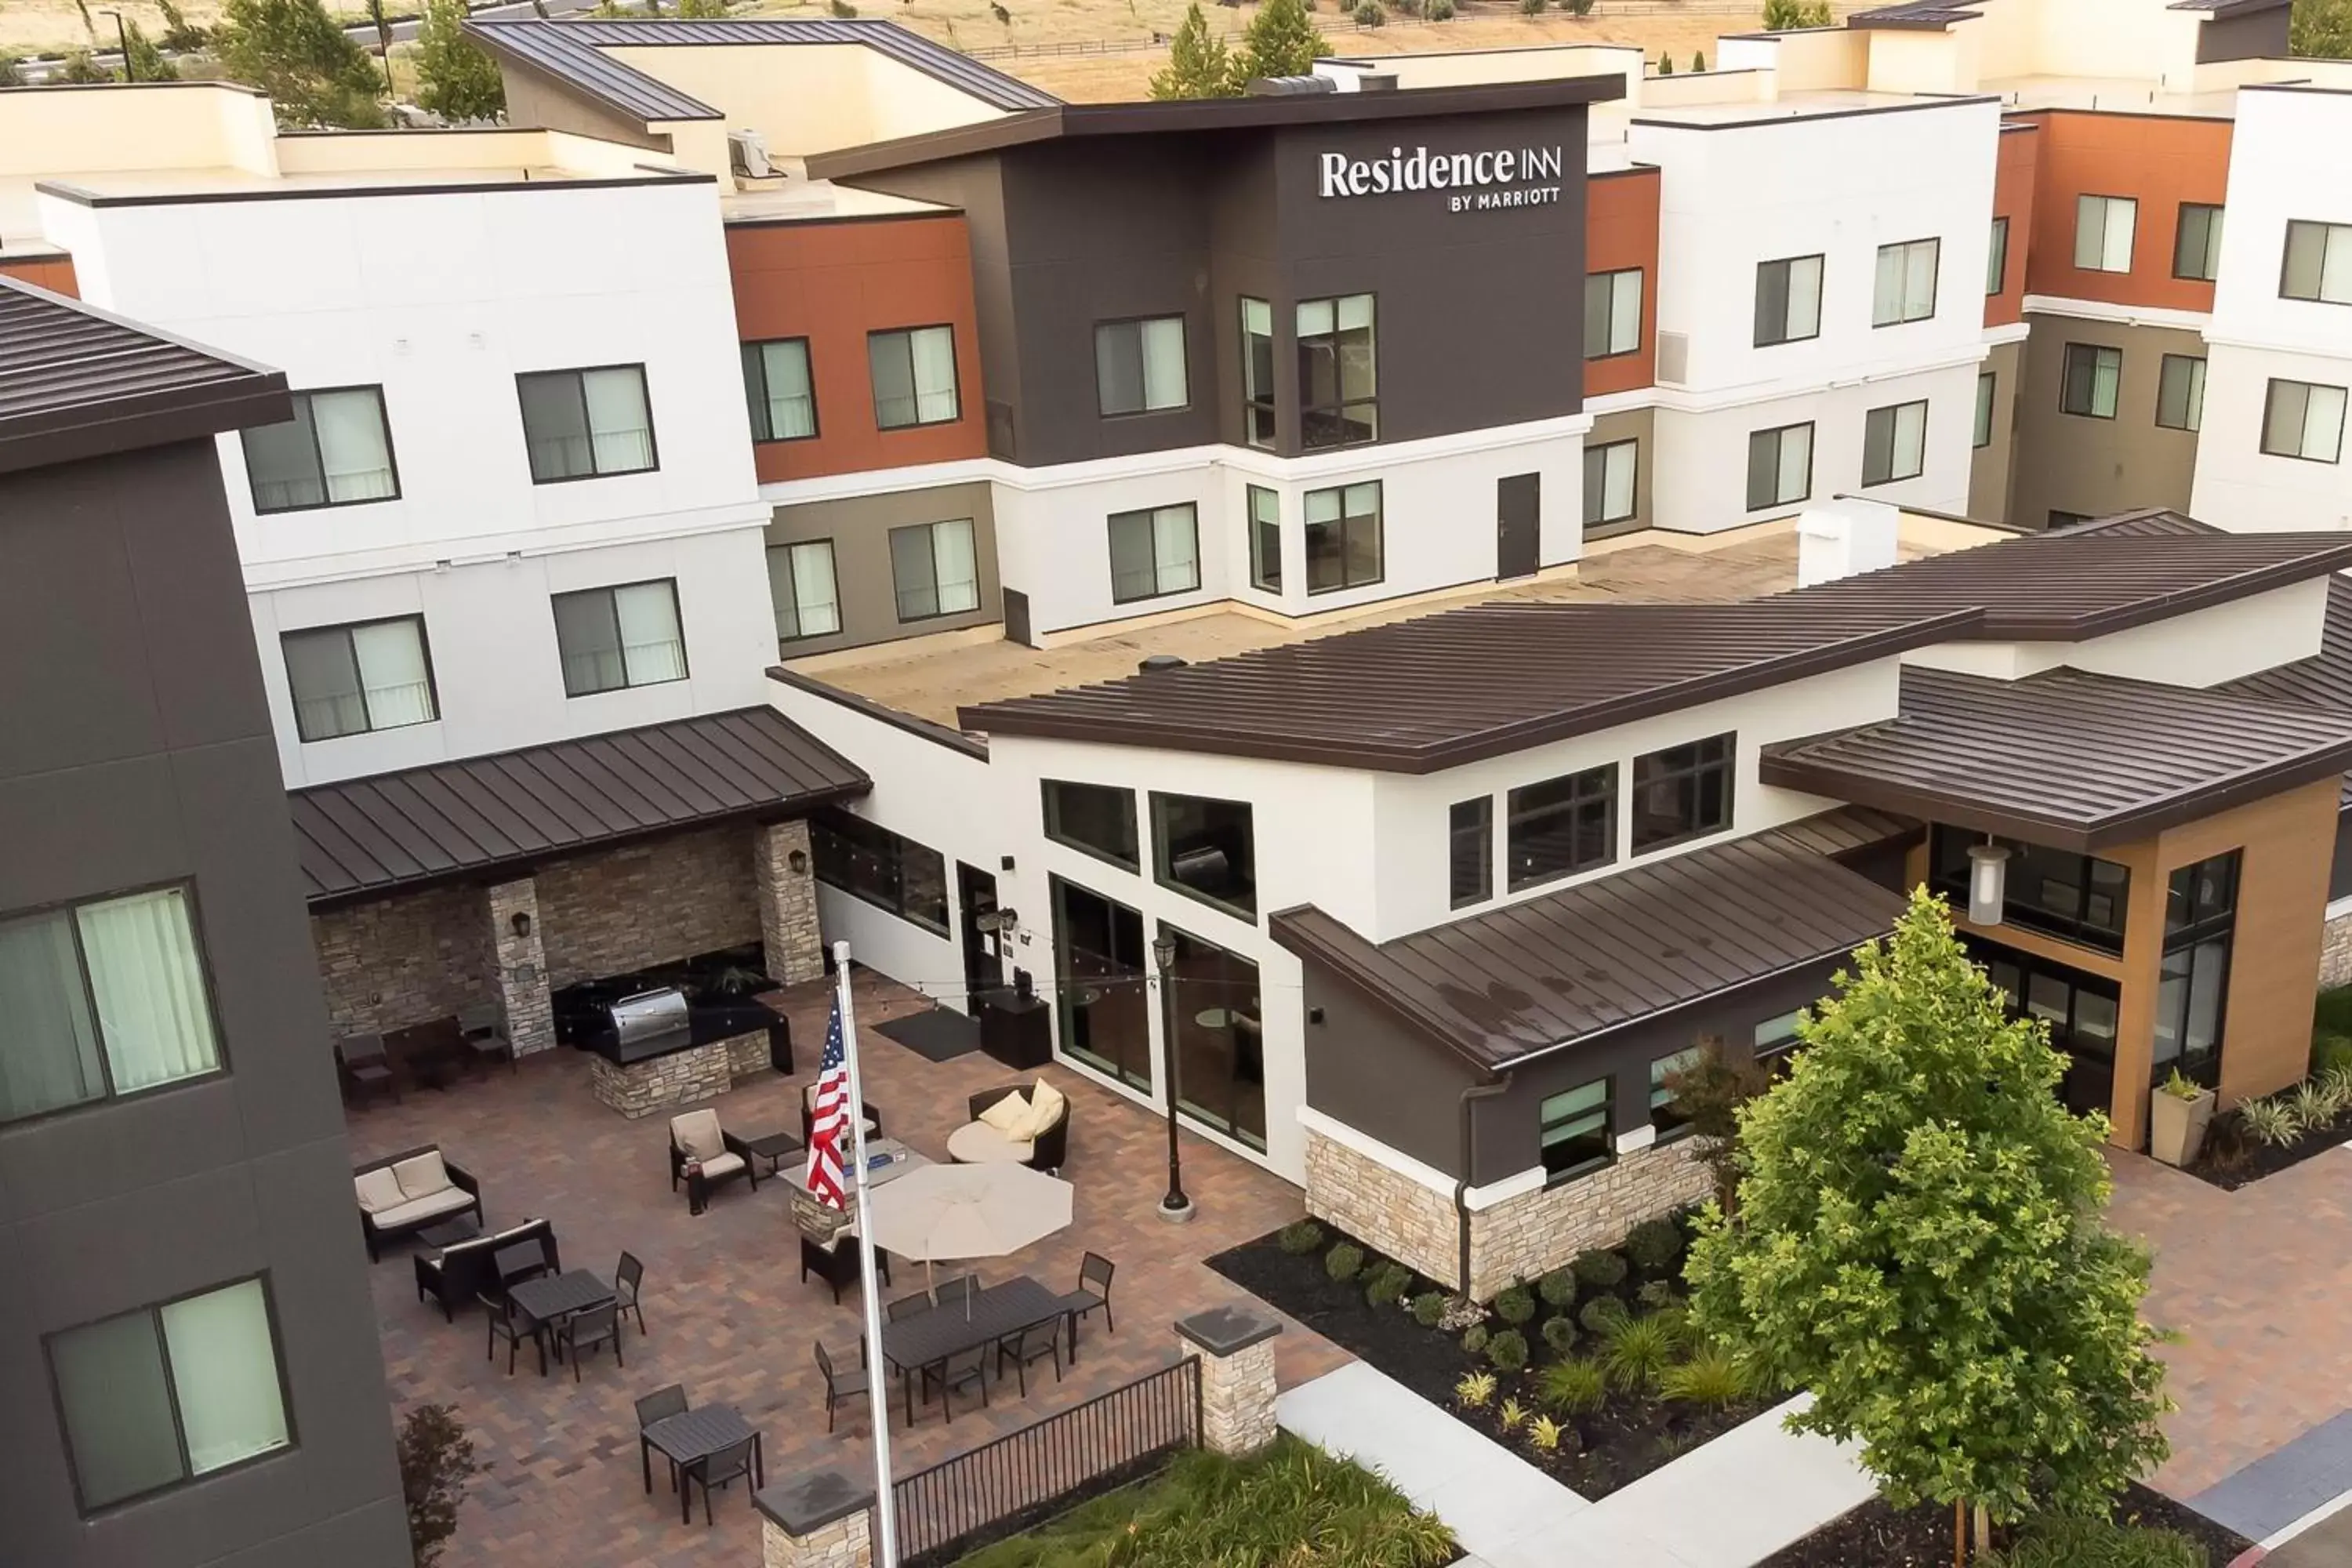 Property building in Residence Inn Livermore